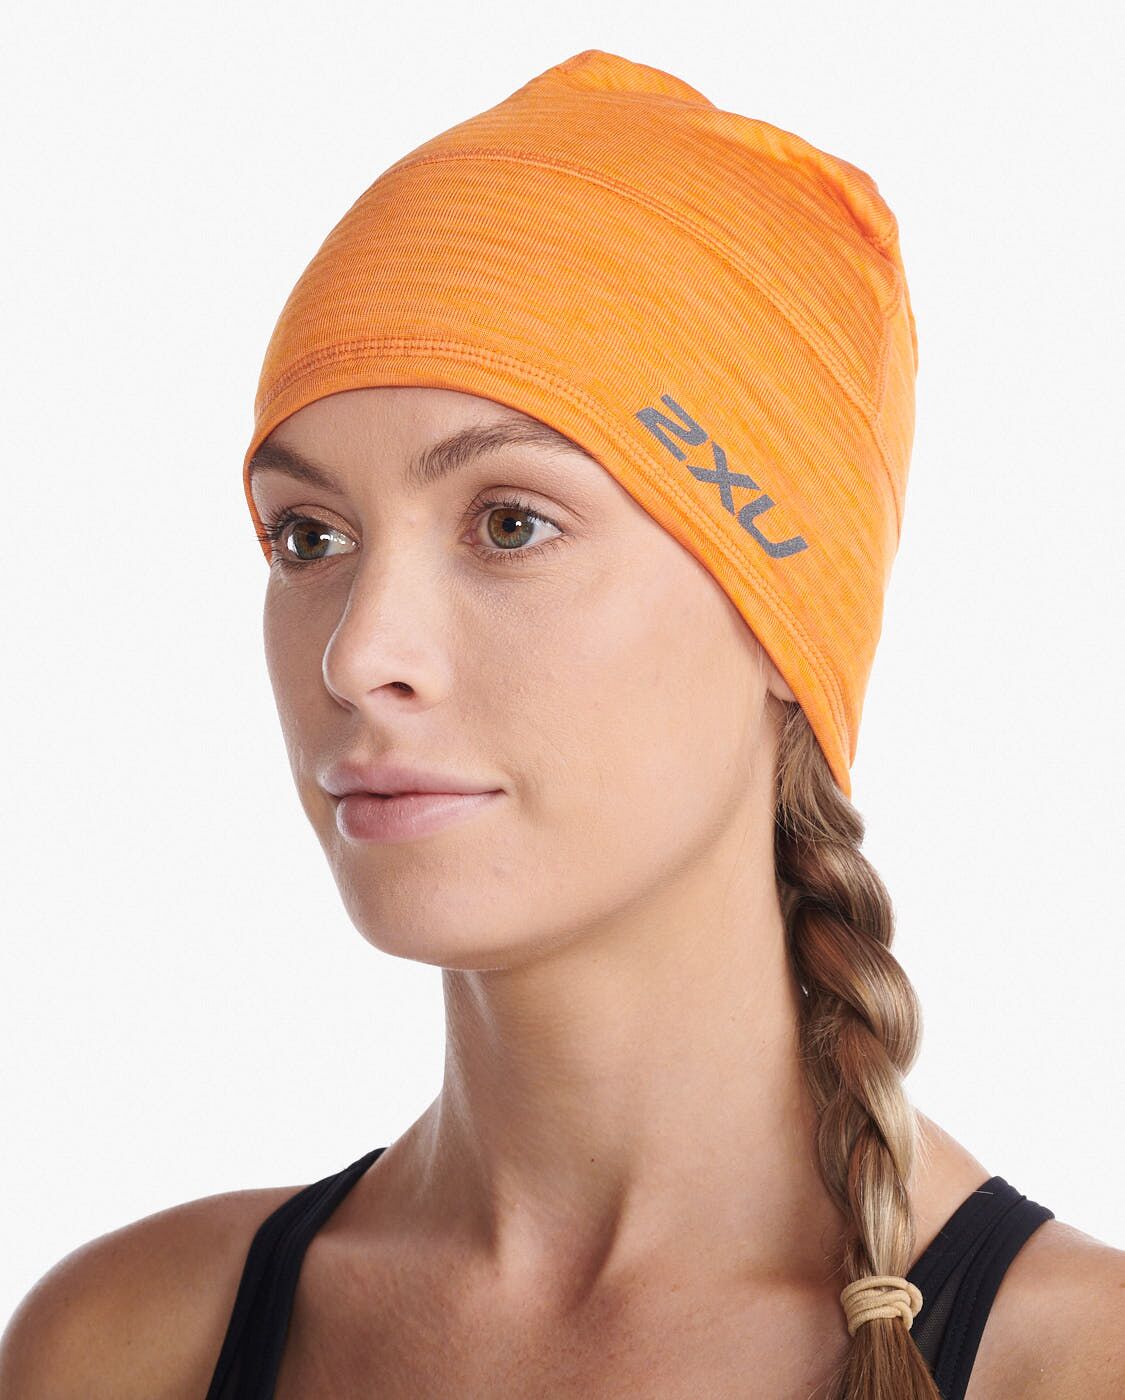 2XU South Africa - Ignition Beanie - Turmeric/Black Reflective